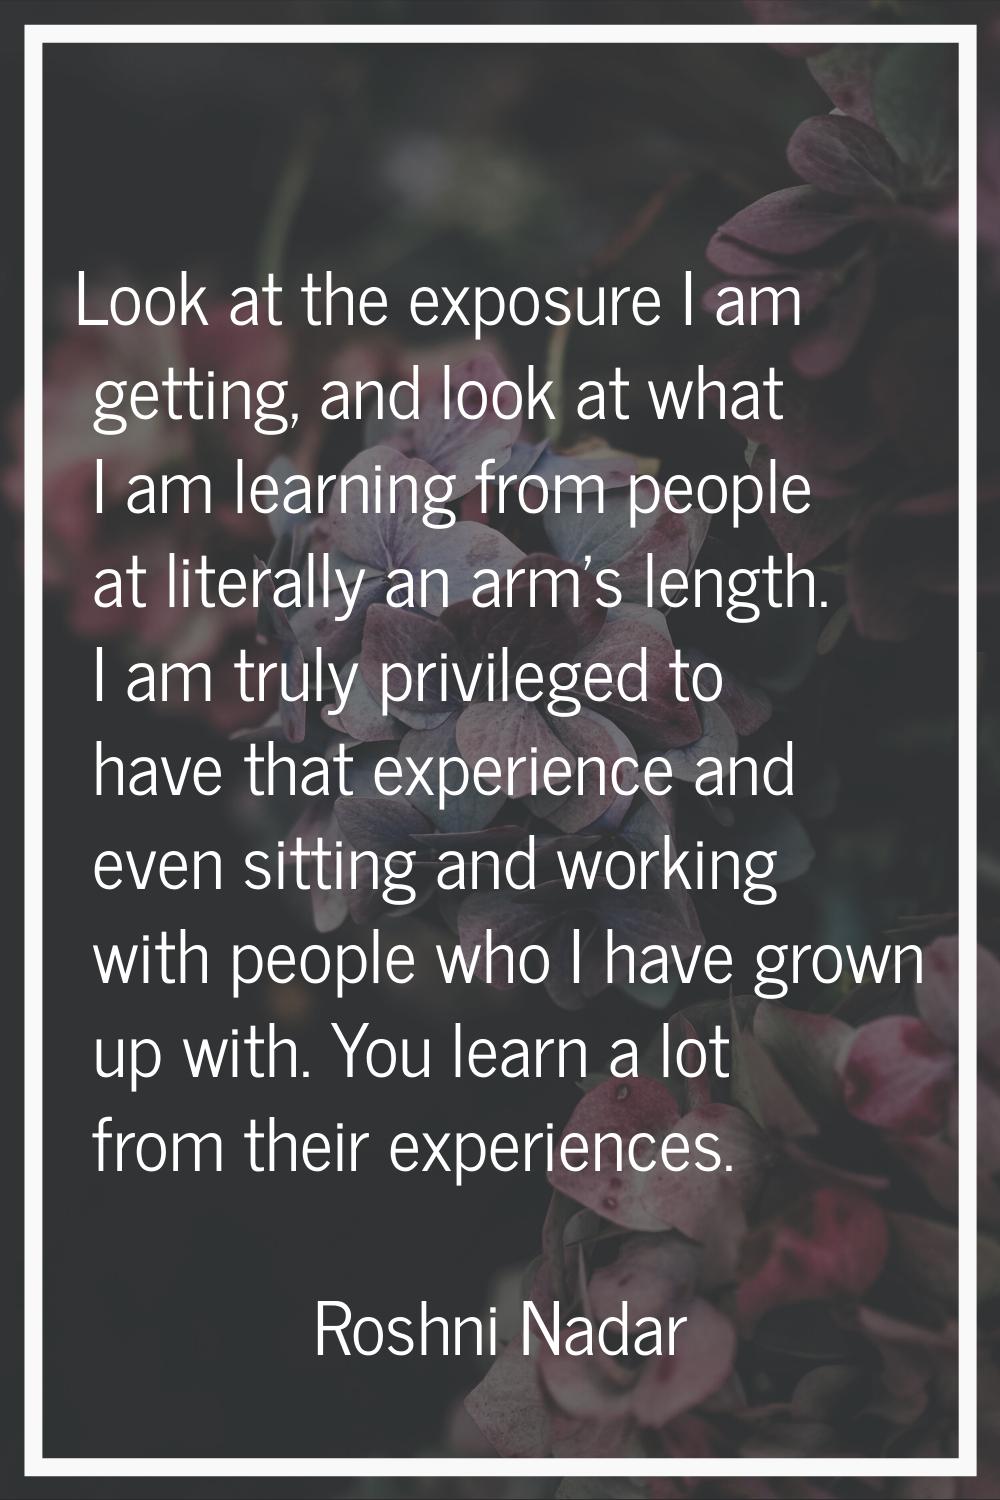 Look at the exposure I am getting, and look at what I am learning from people at literally an arm's